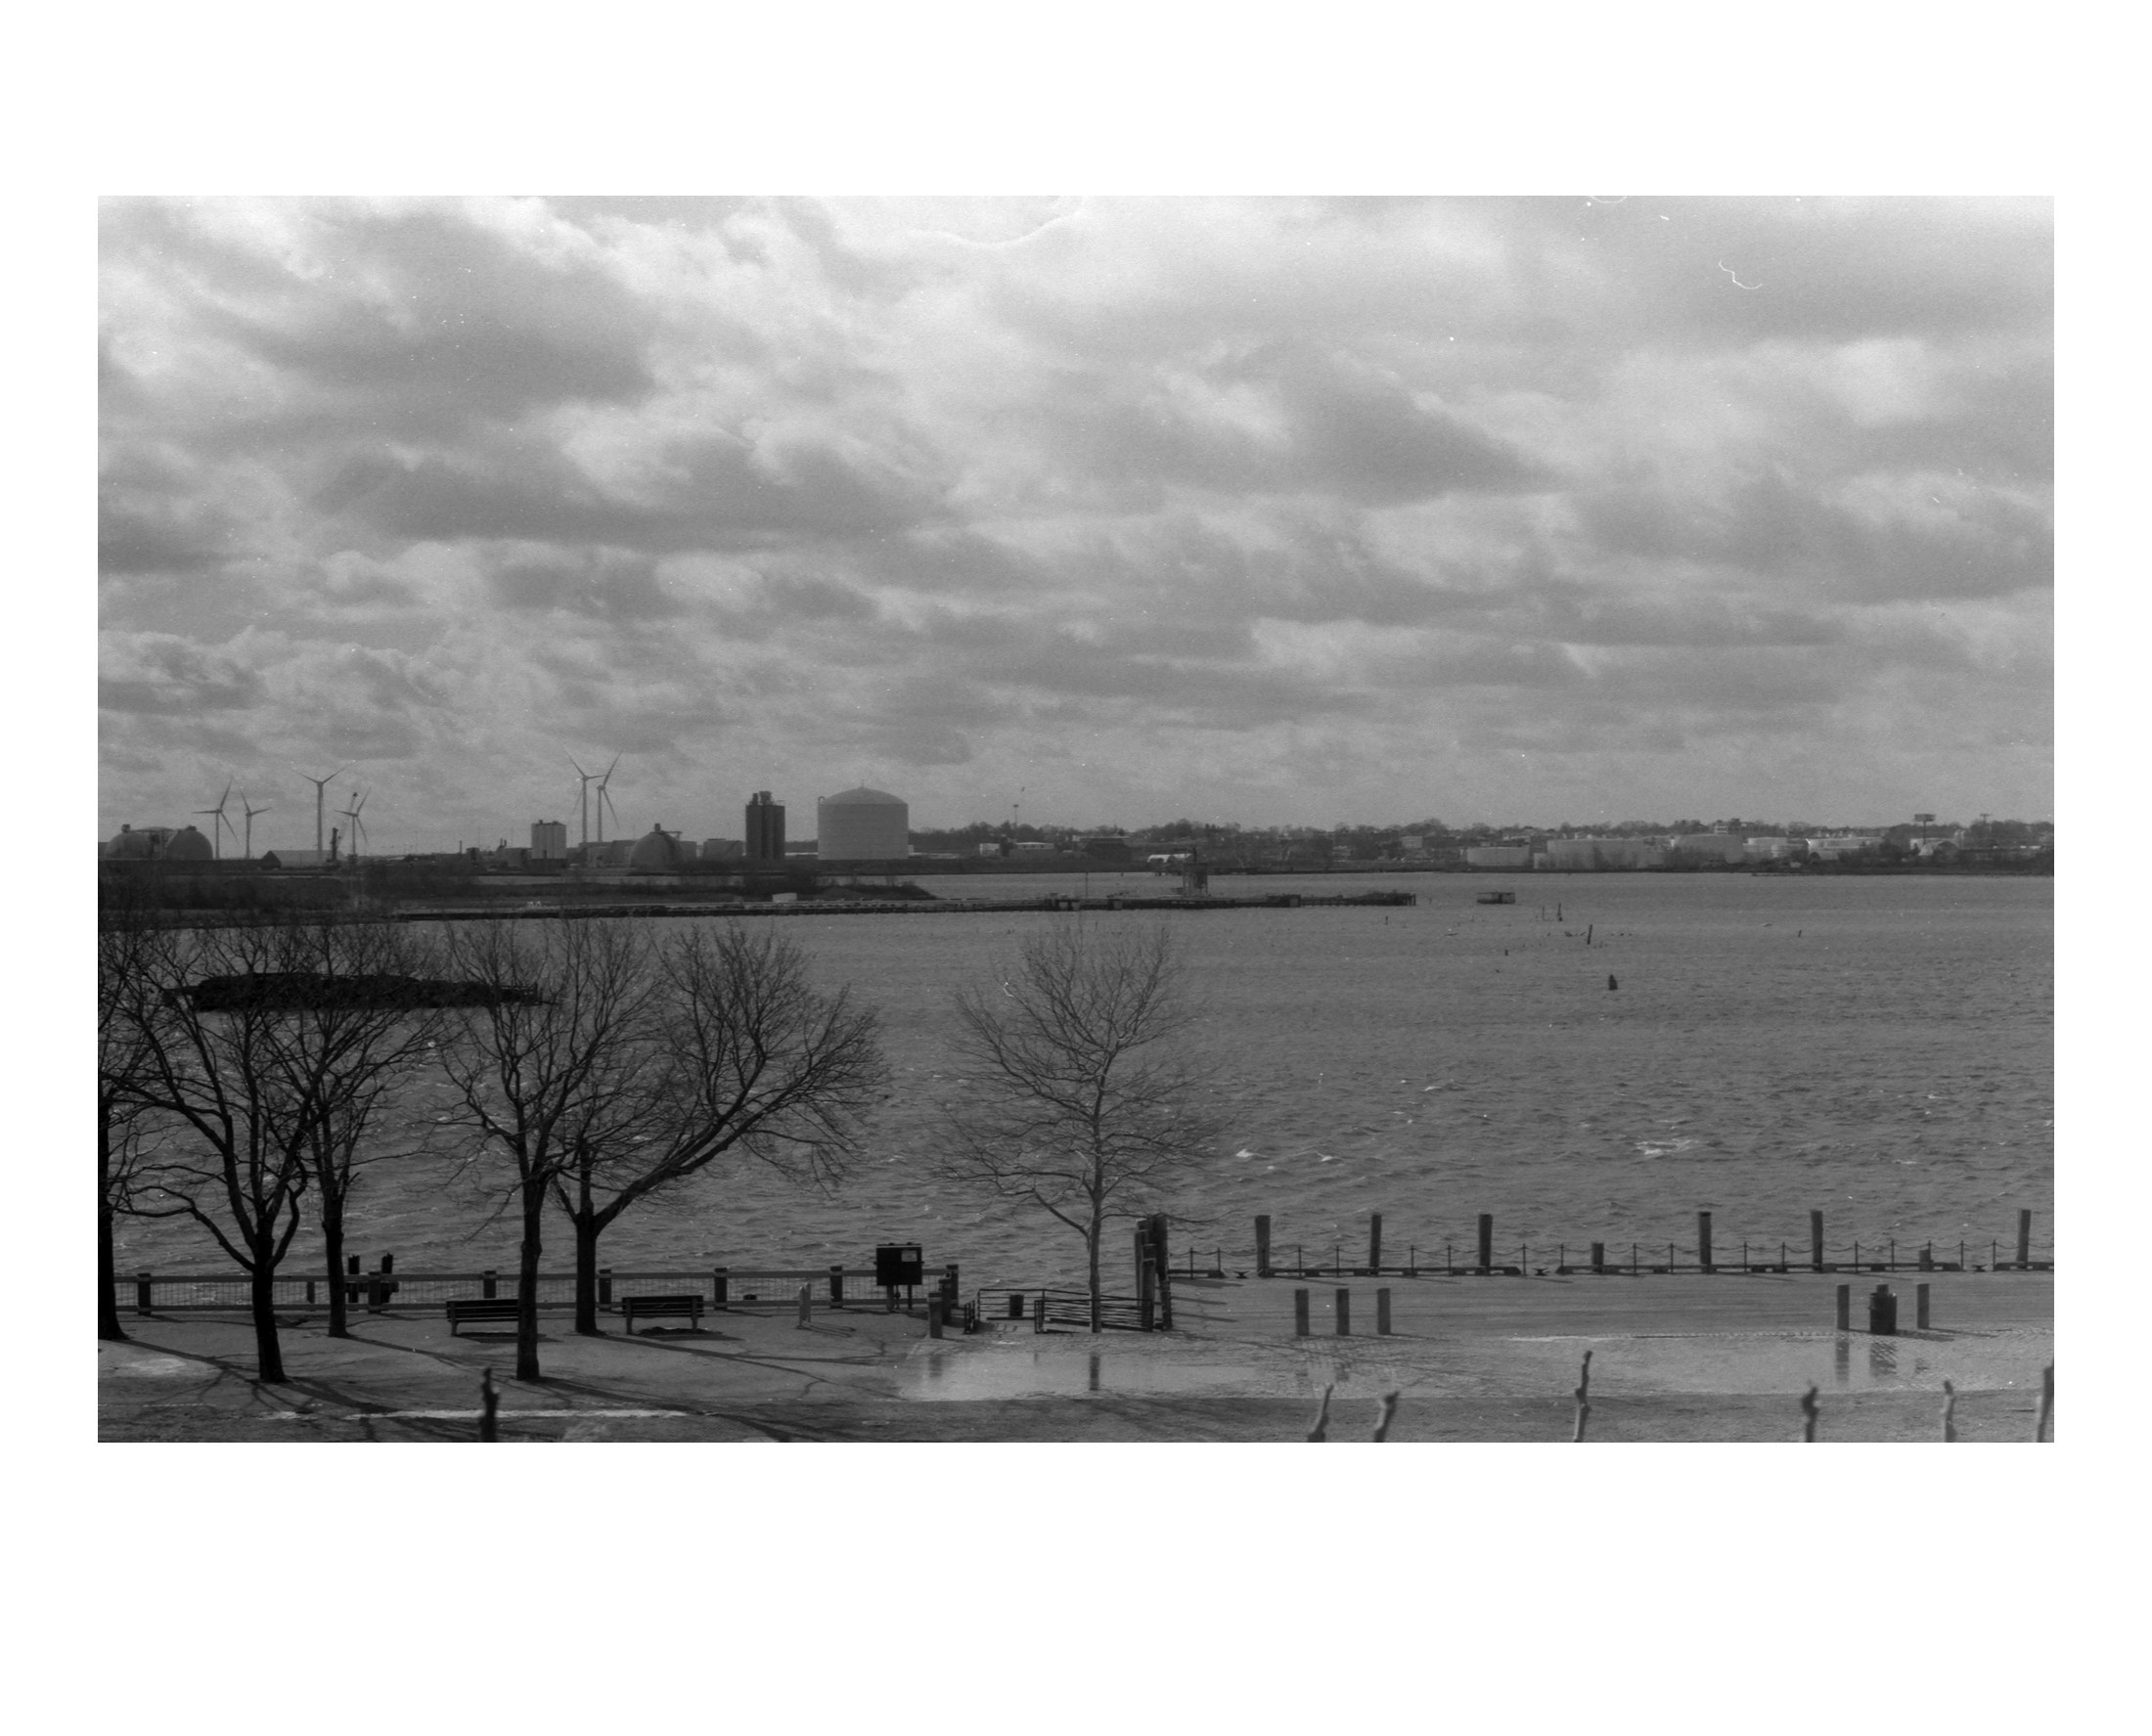 looking out over the water with the park in the foreground